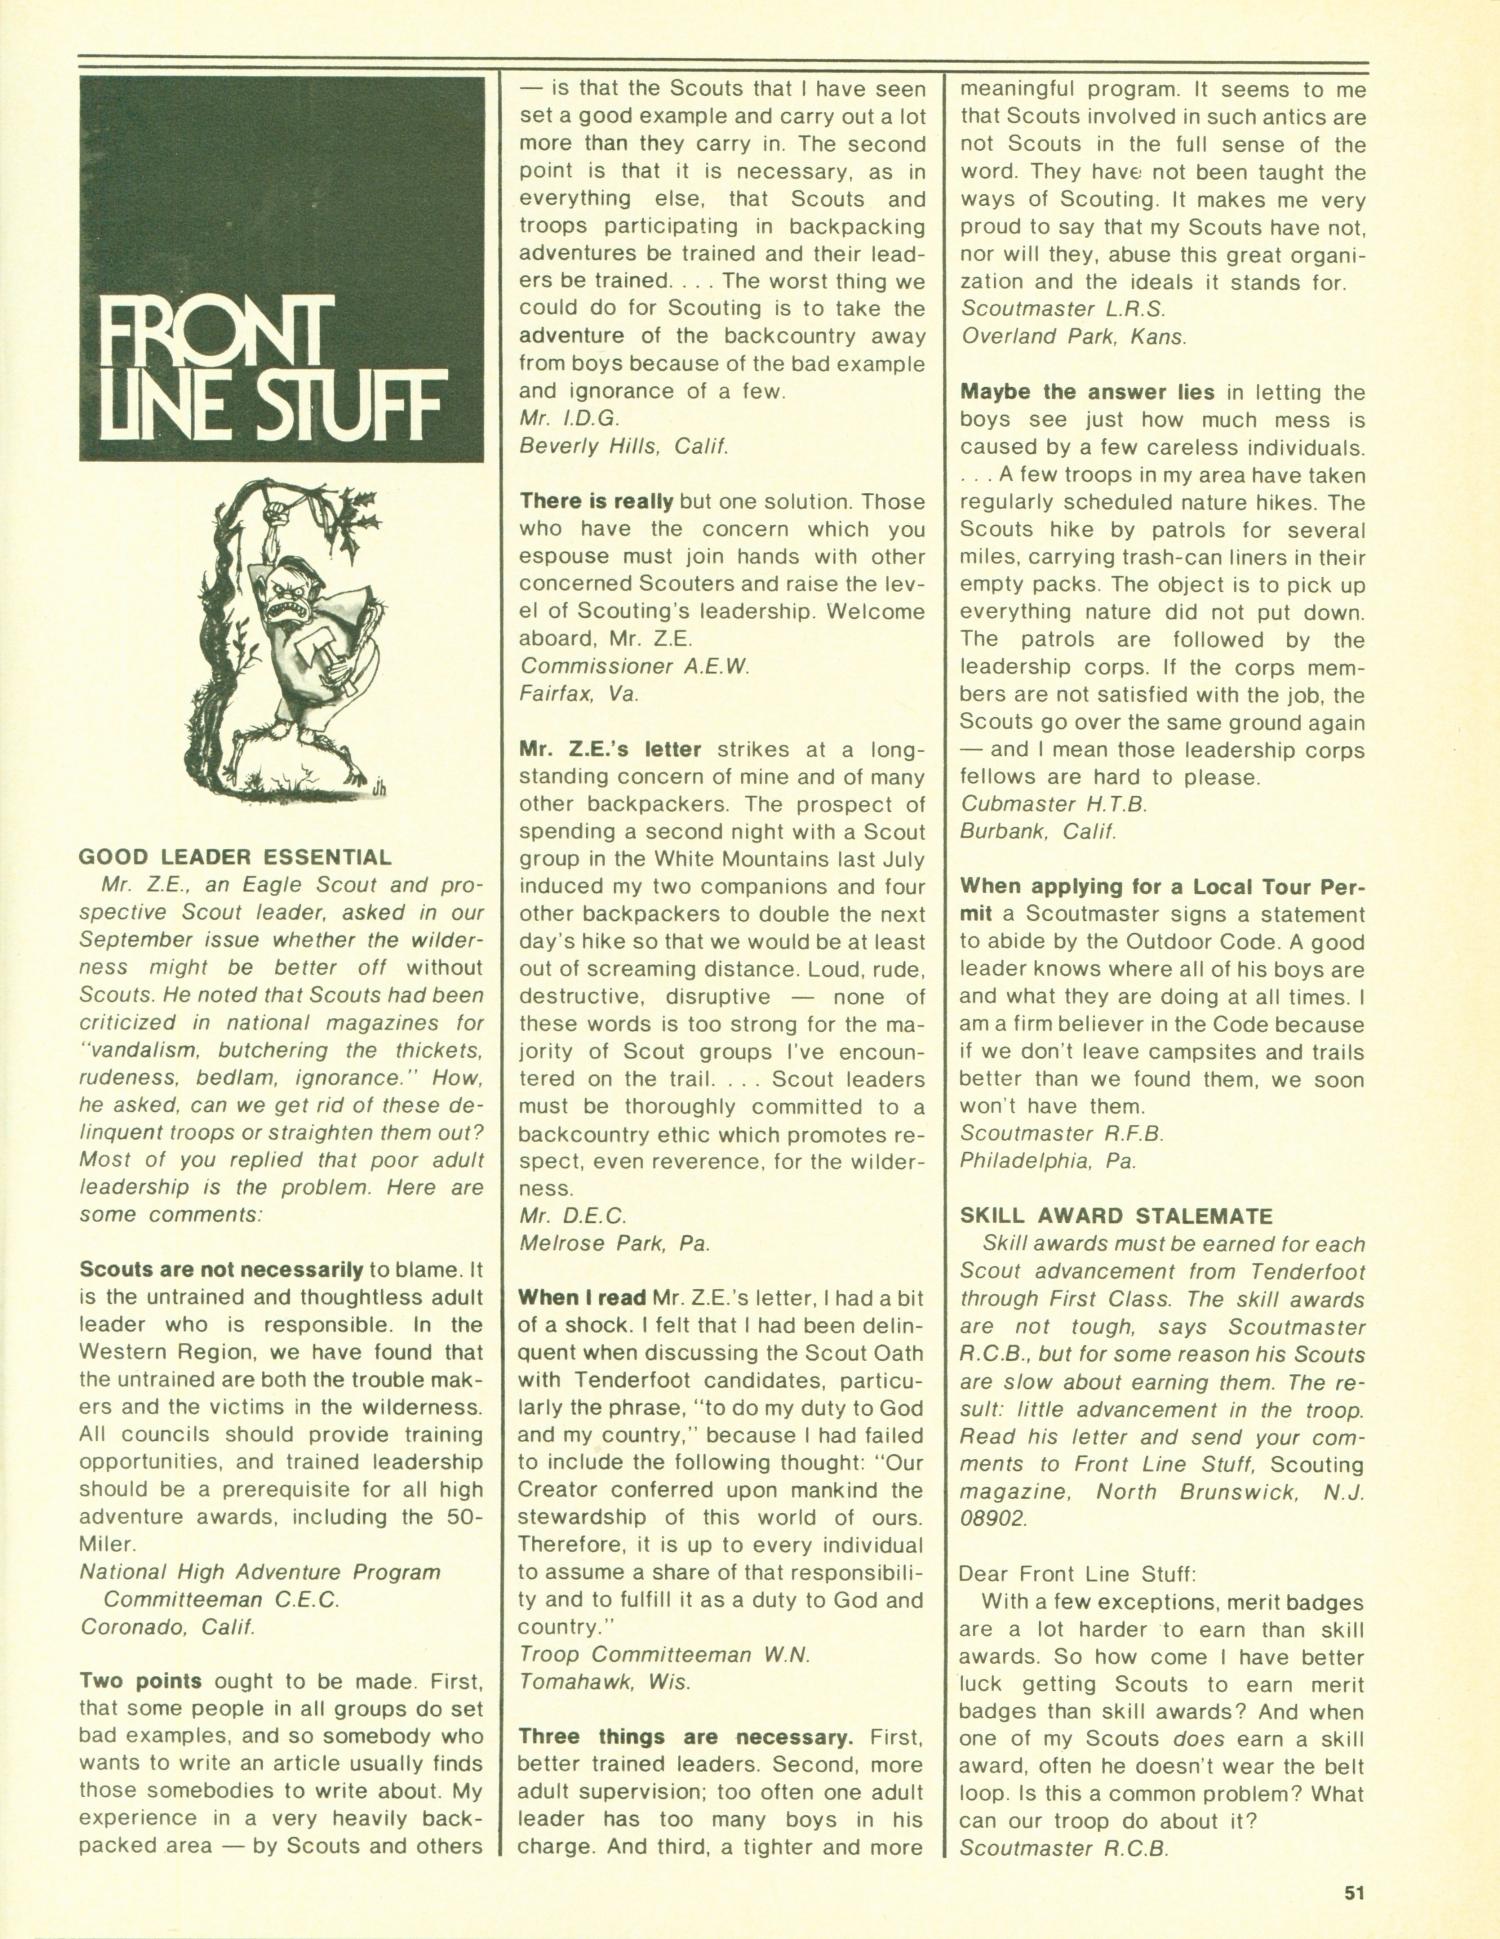 Scouting, Volume 63, Number 1, January-February 1975
                                                
                                                    51
                                                